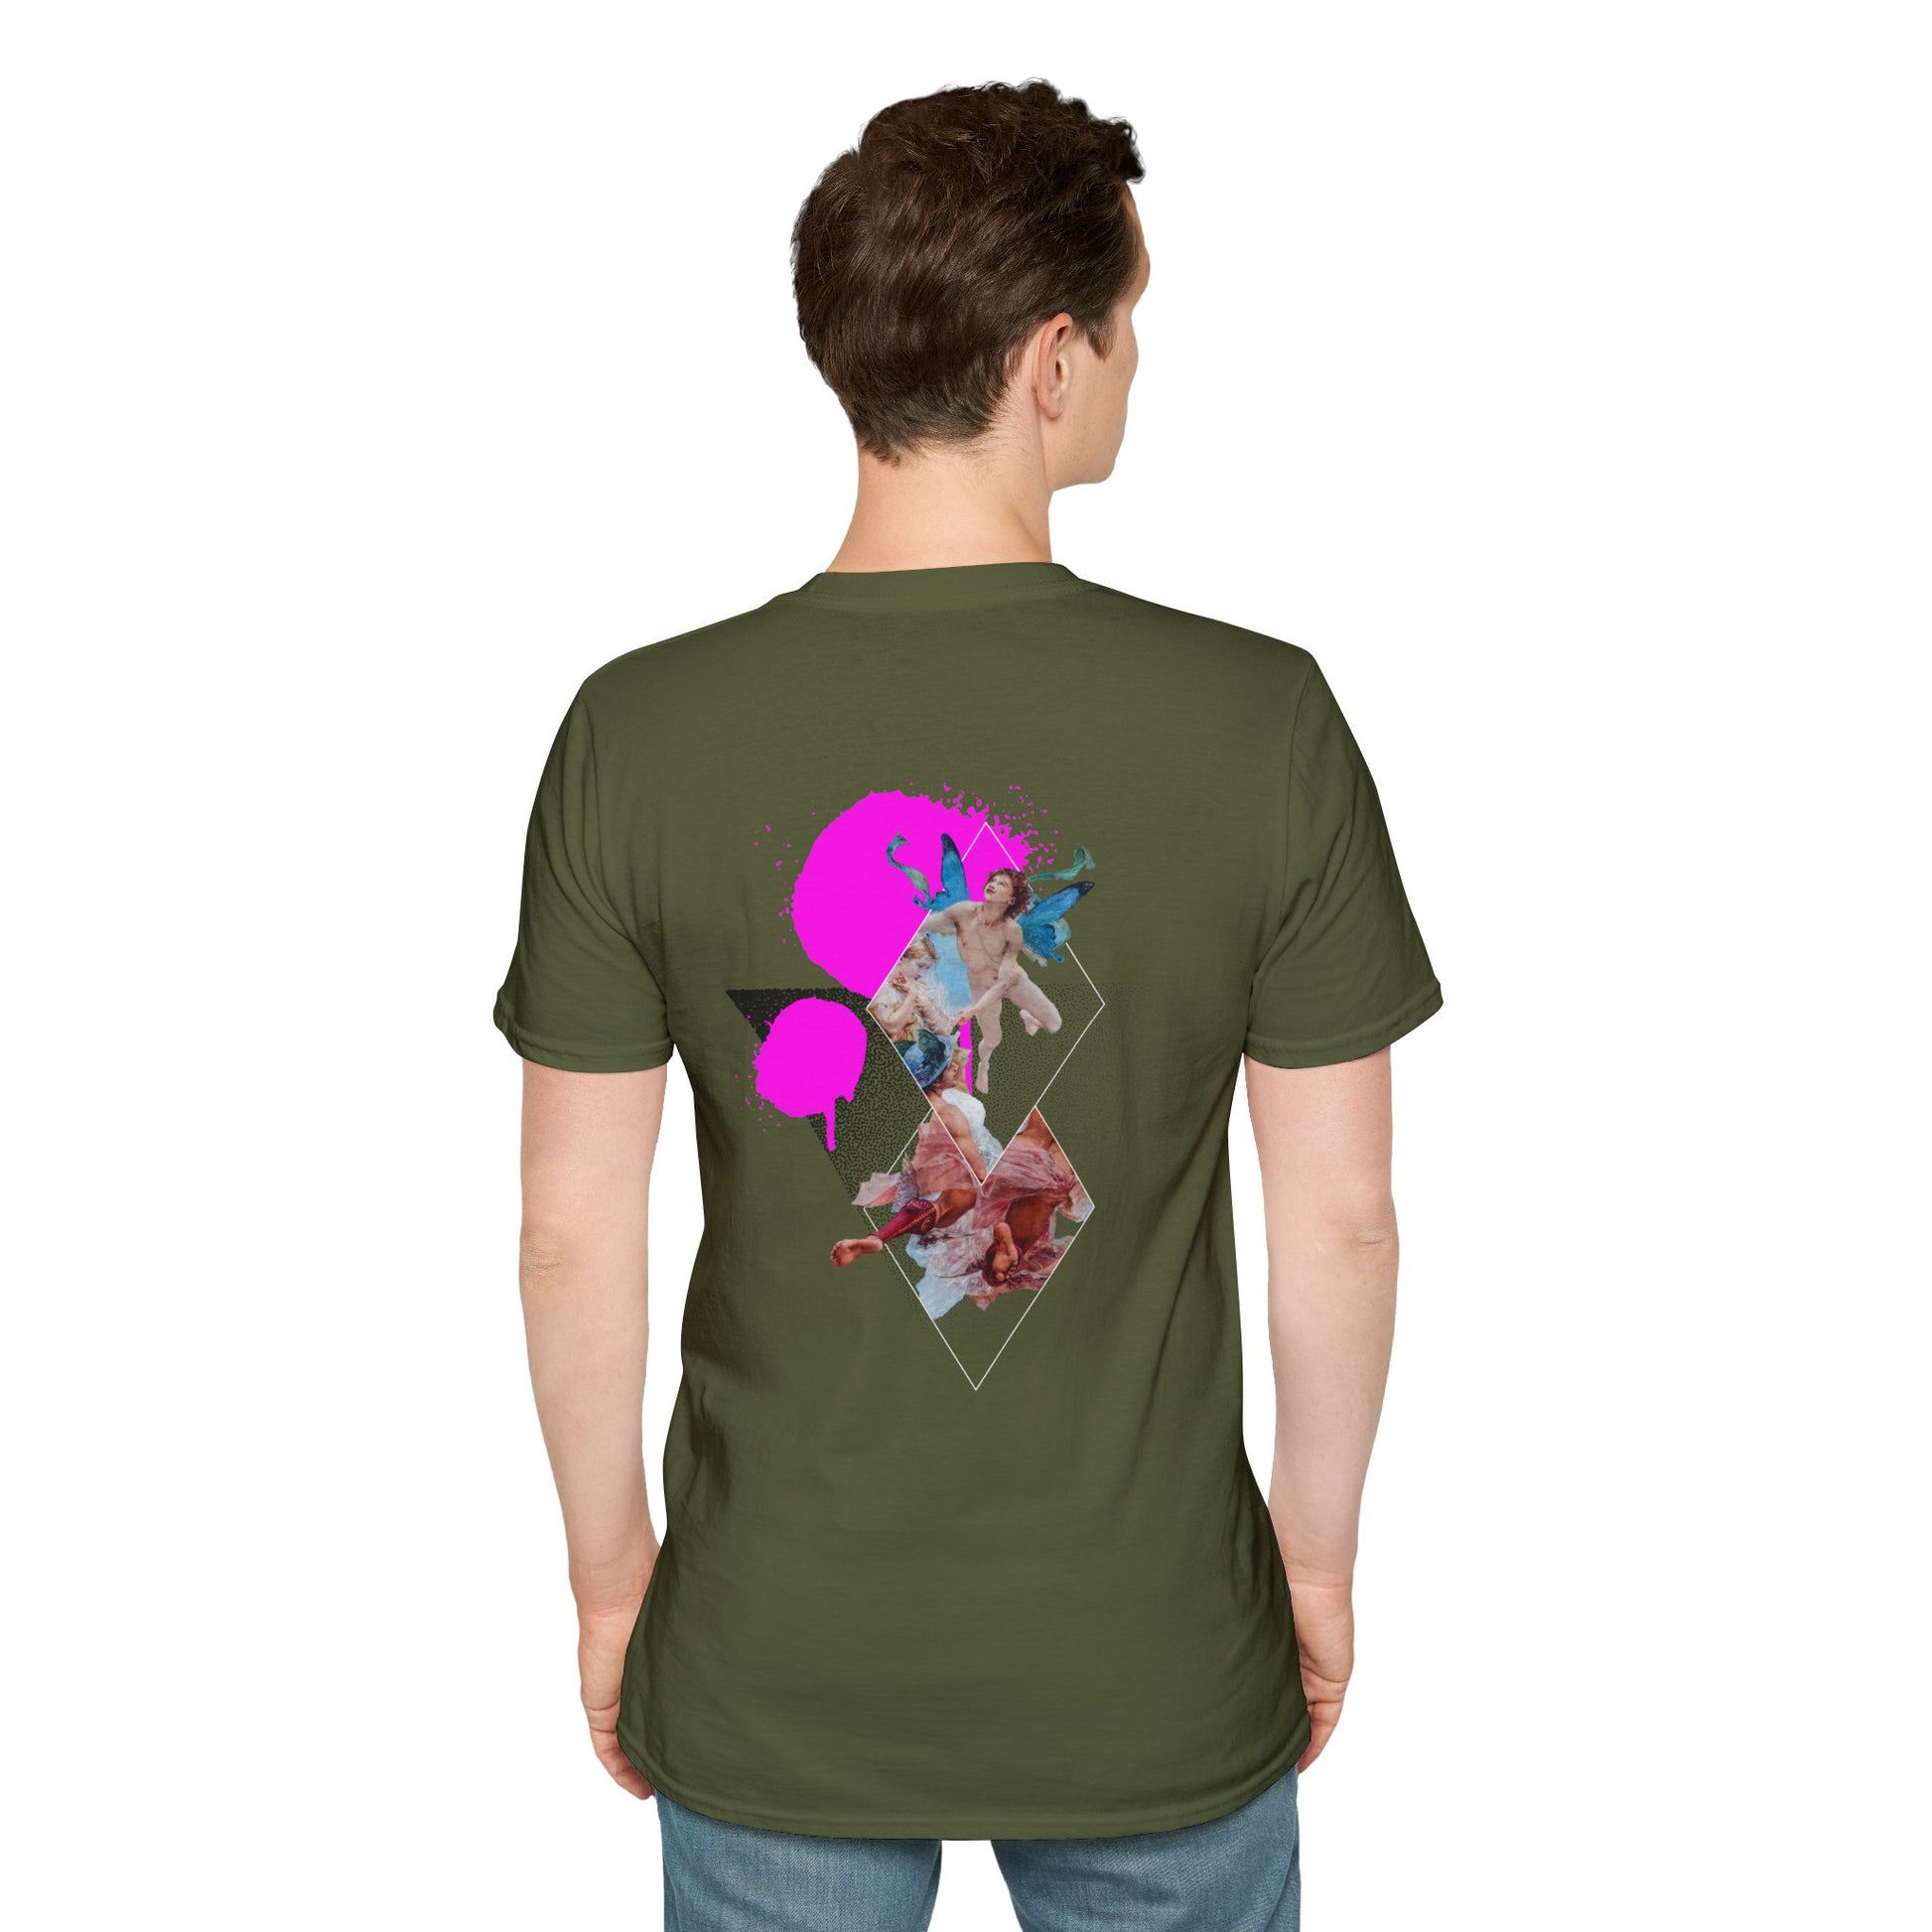 Heather Green T-shirt with a surreal collage of butterflies in spray paint design